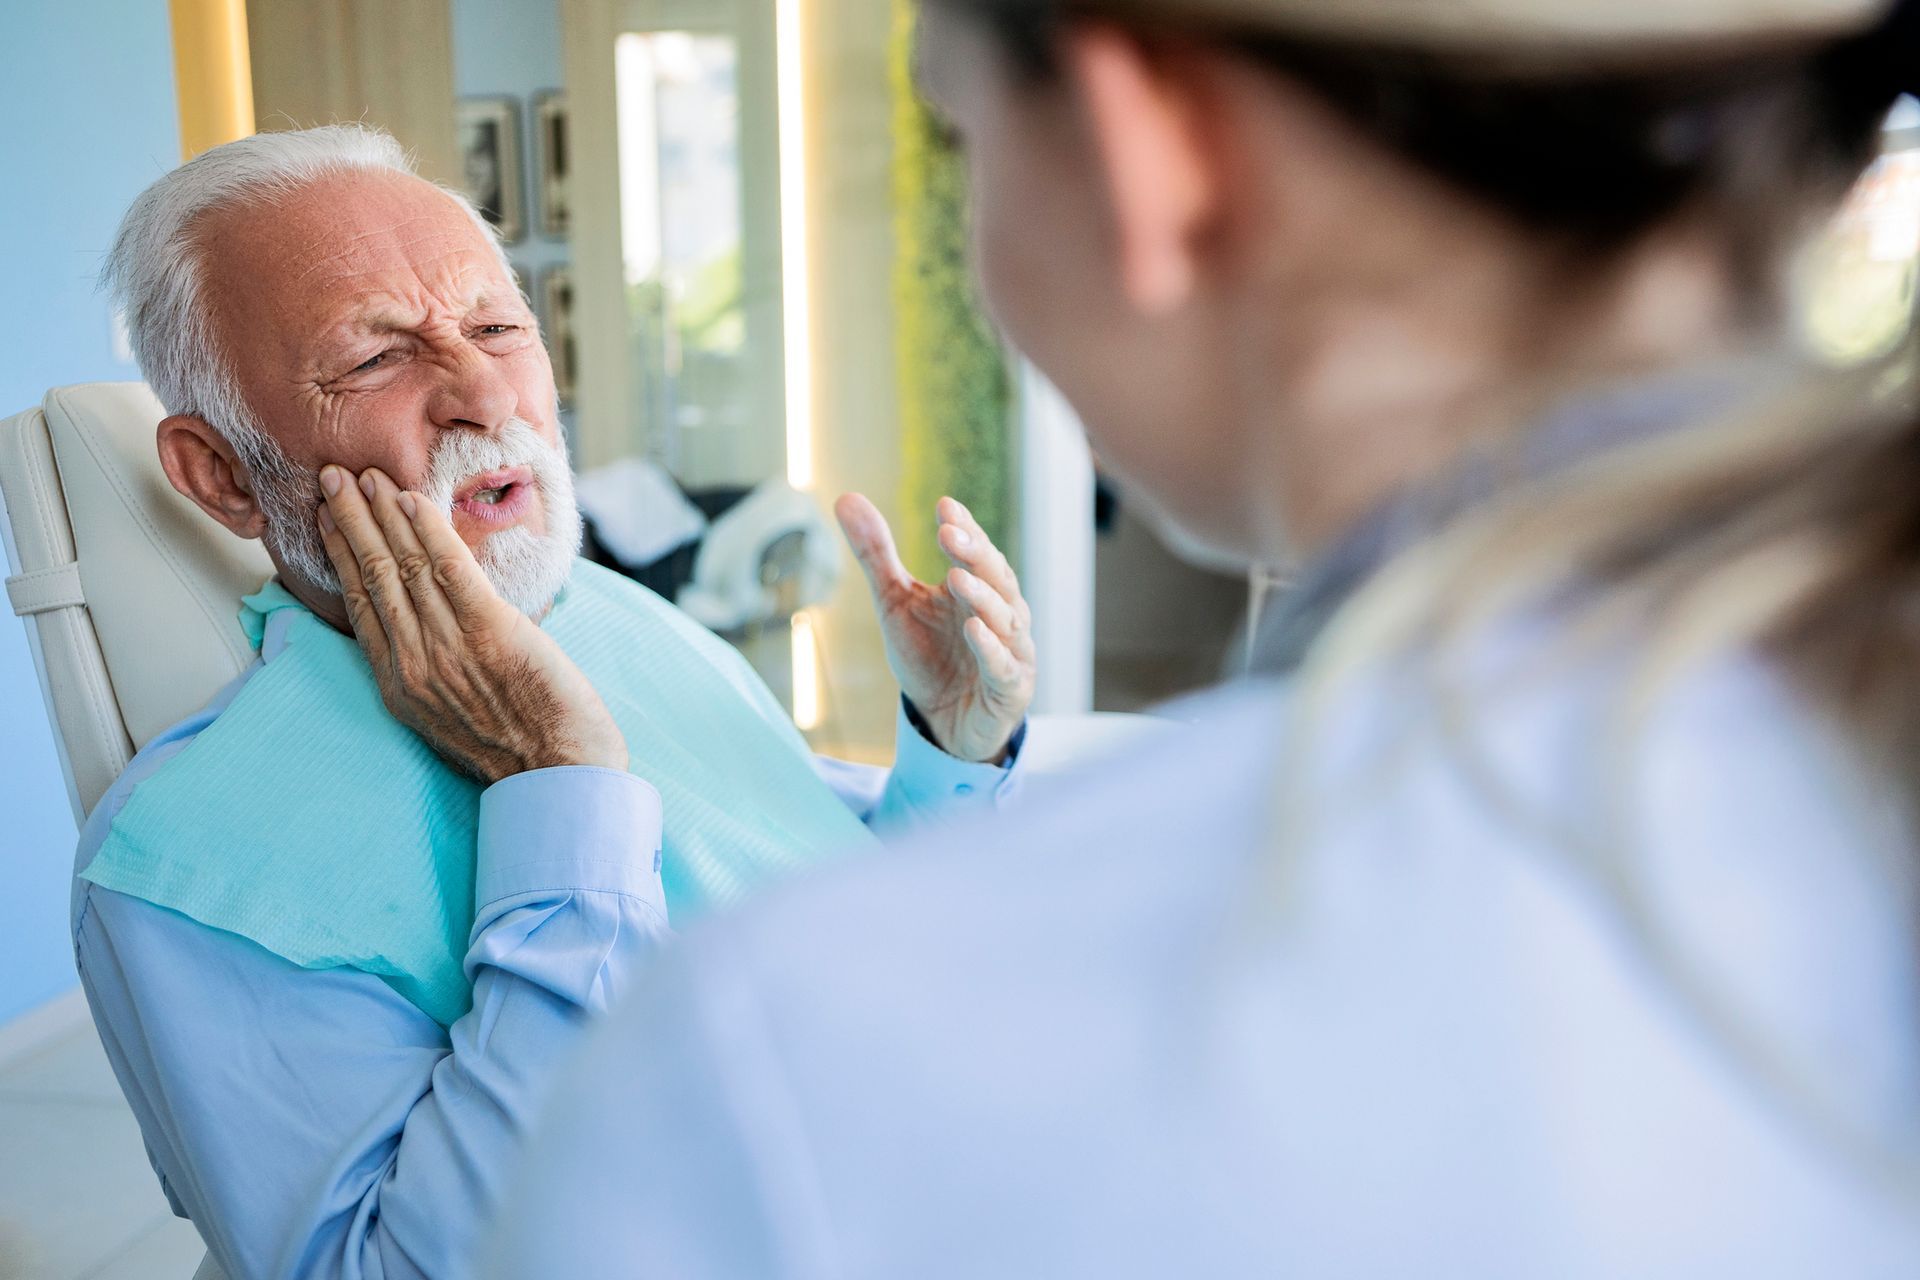 An elderly man is sitting in a dental chair with a toothache.